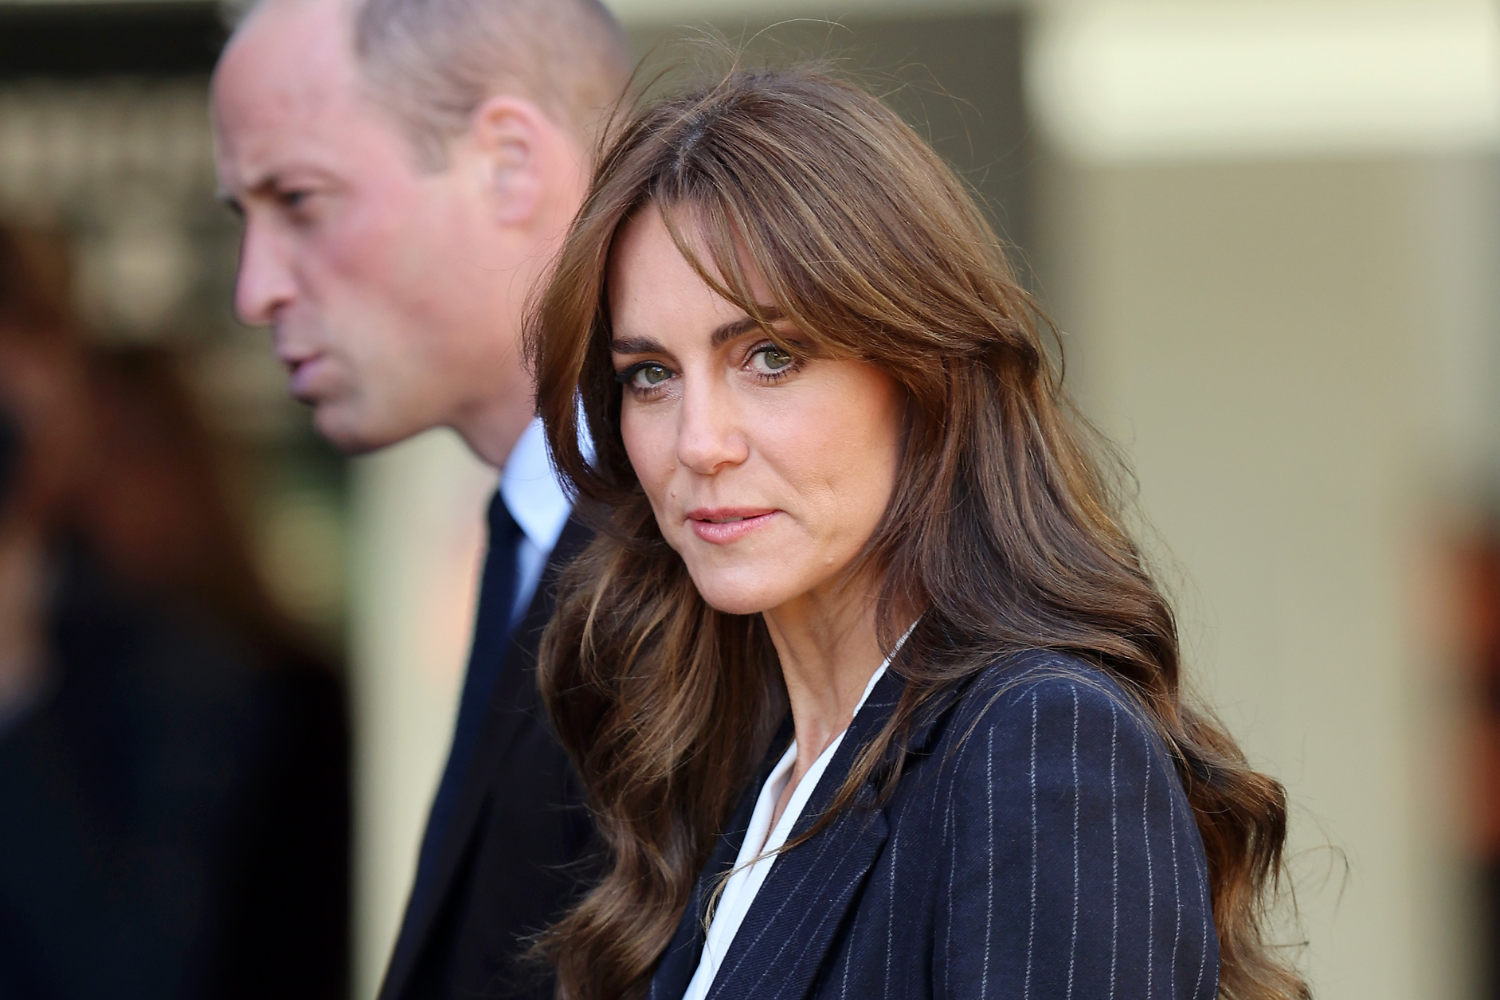 Kate Middleton Just Showed Her New Pantsuit Style Is Here to Stay